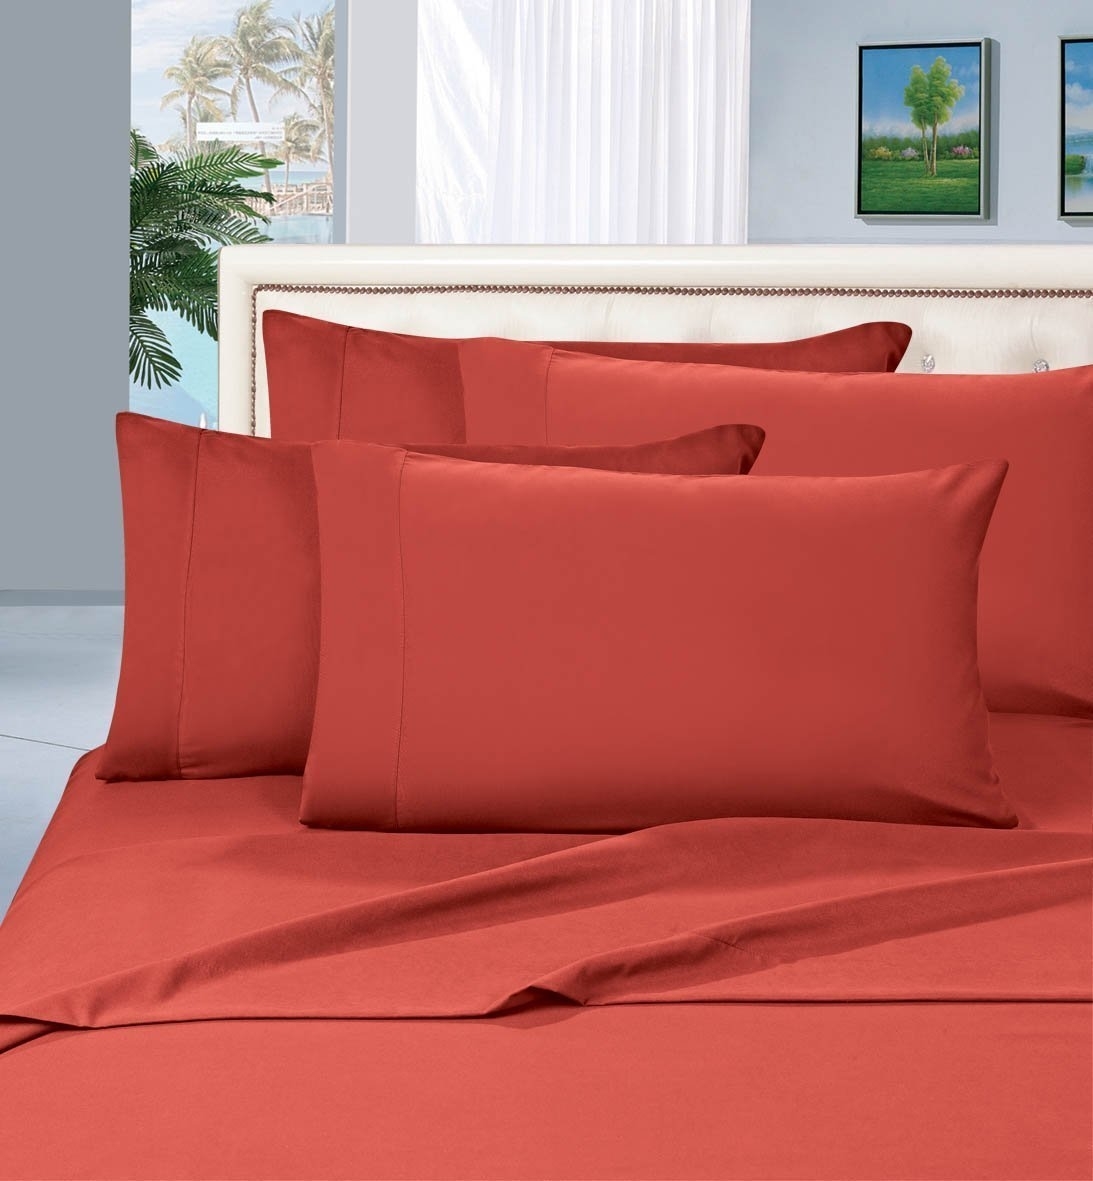 Elegant Comfort 1500 Series Wrinkle Resistant Egyptian Quality Hypoallergenic Ultra Soft Luxury 4-piece Bed Sheet Set, King, Rust